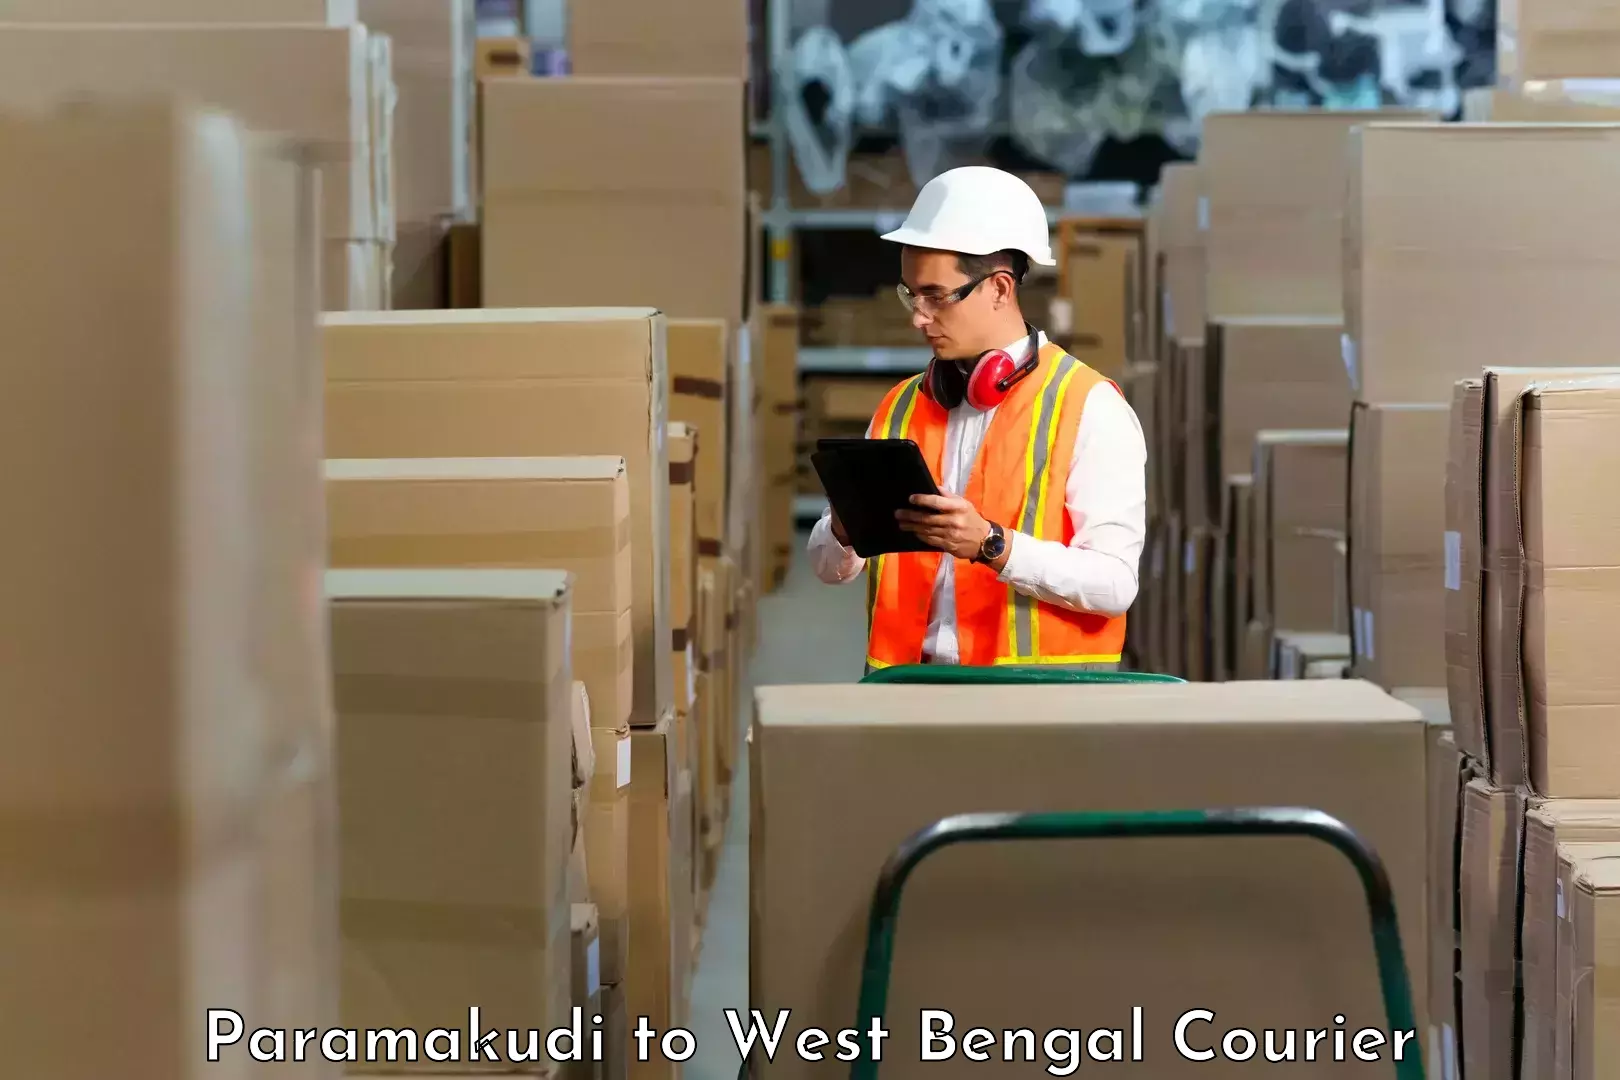 Cash on delivery service Paramakudi to West Bengal